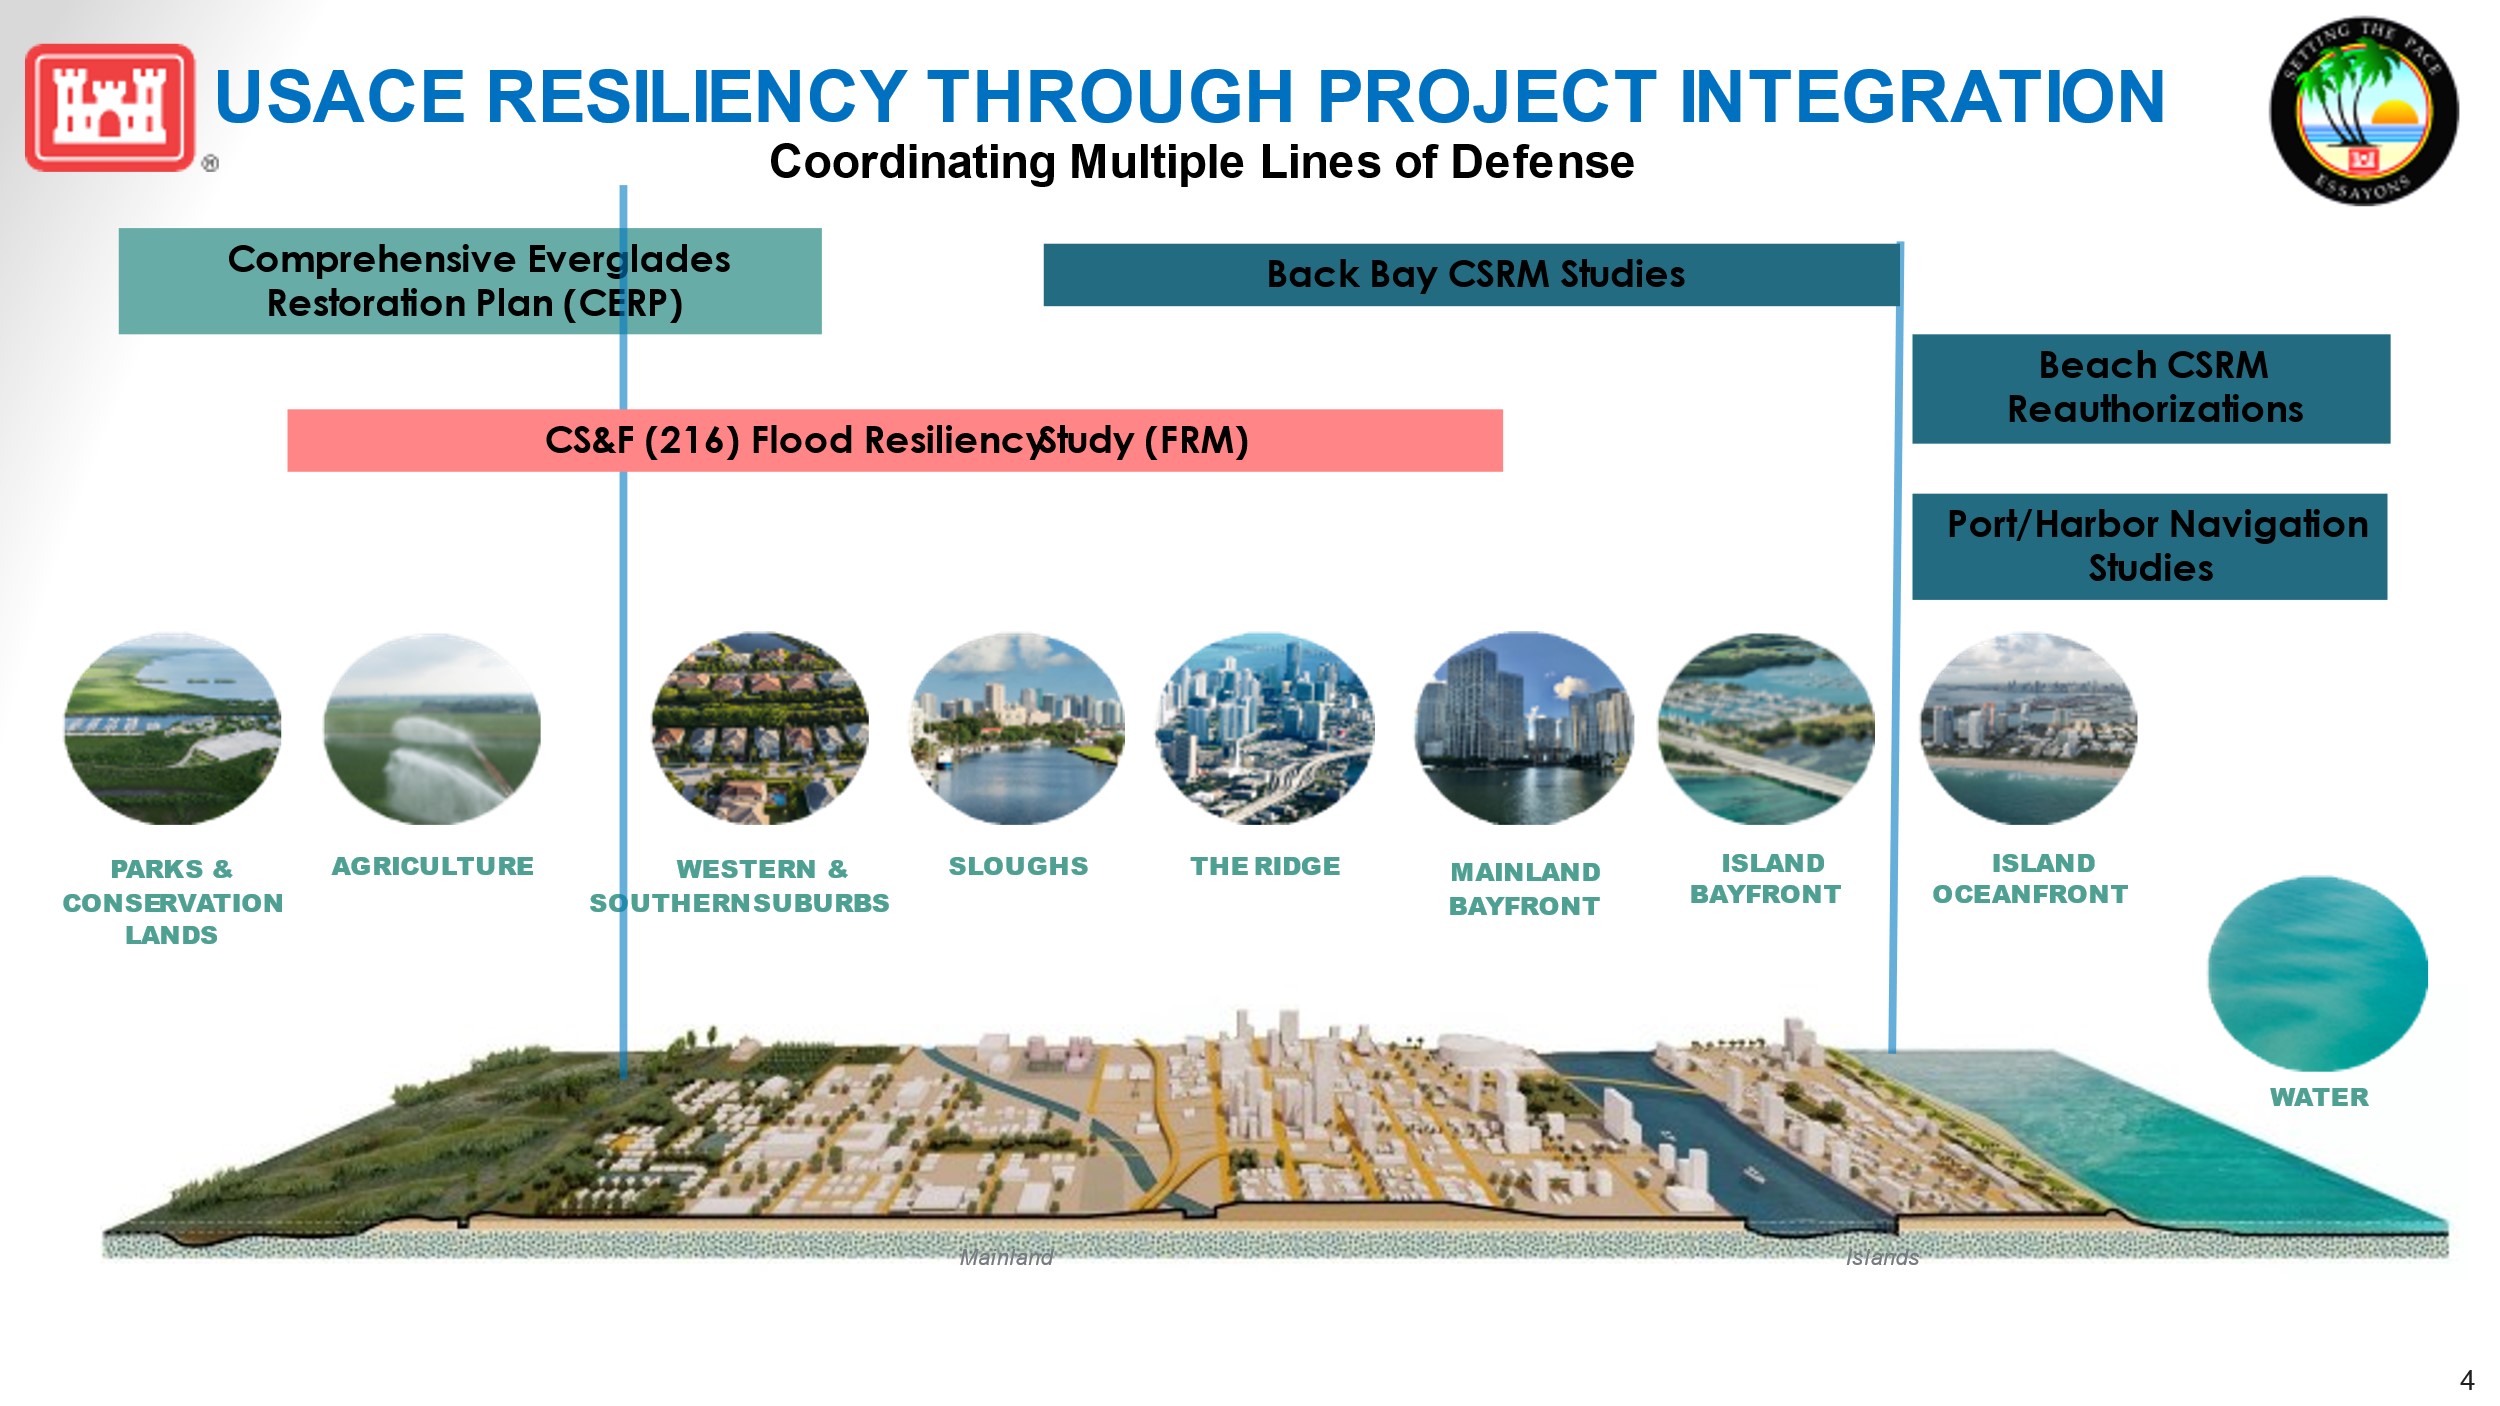 USACE RESILIENCY THROUGH PROJECT INTEGRATION